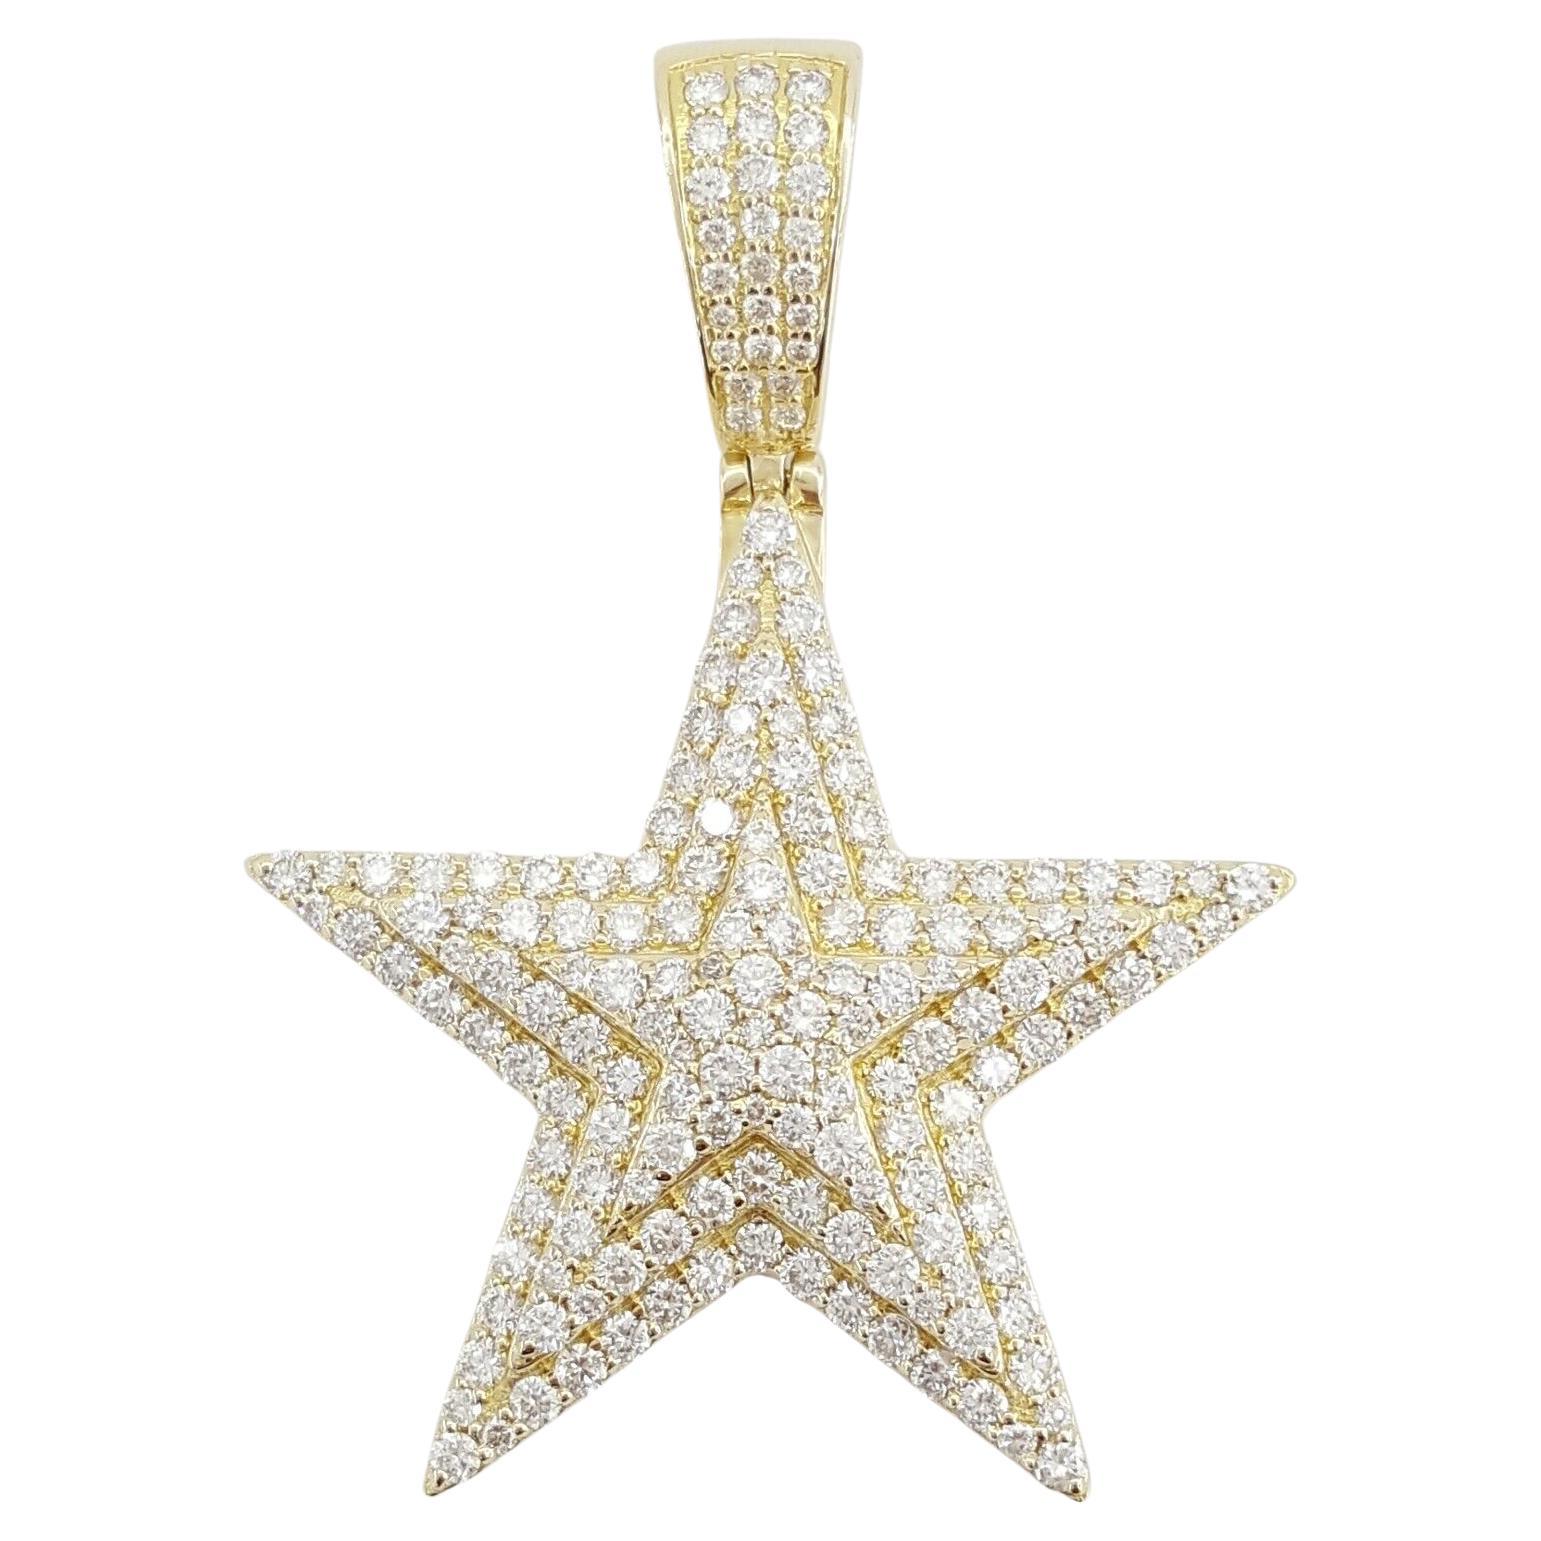 A 2.3 ct Total Weight Round Brilliant Cut Diamond Star Pendant 